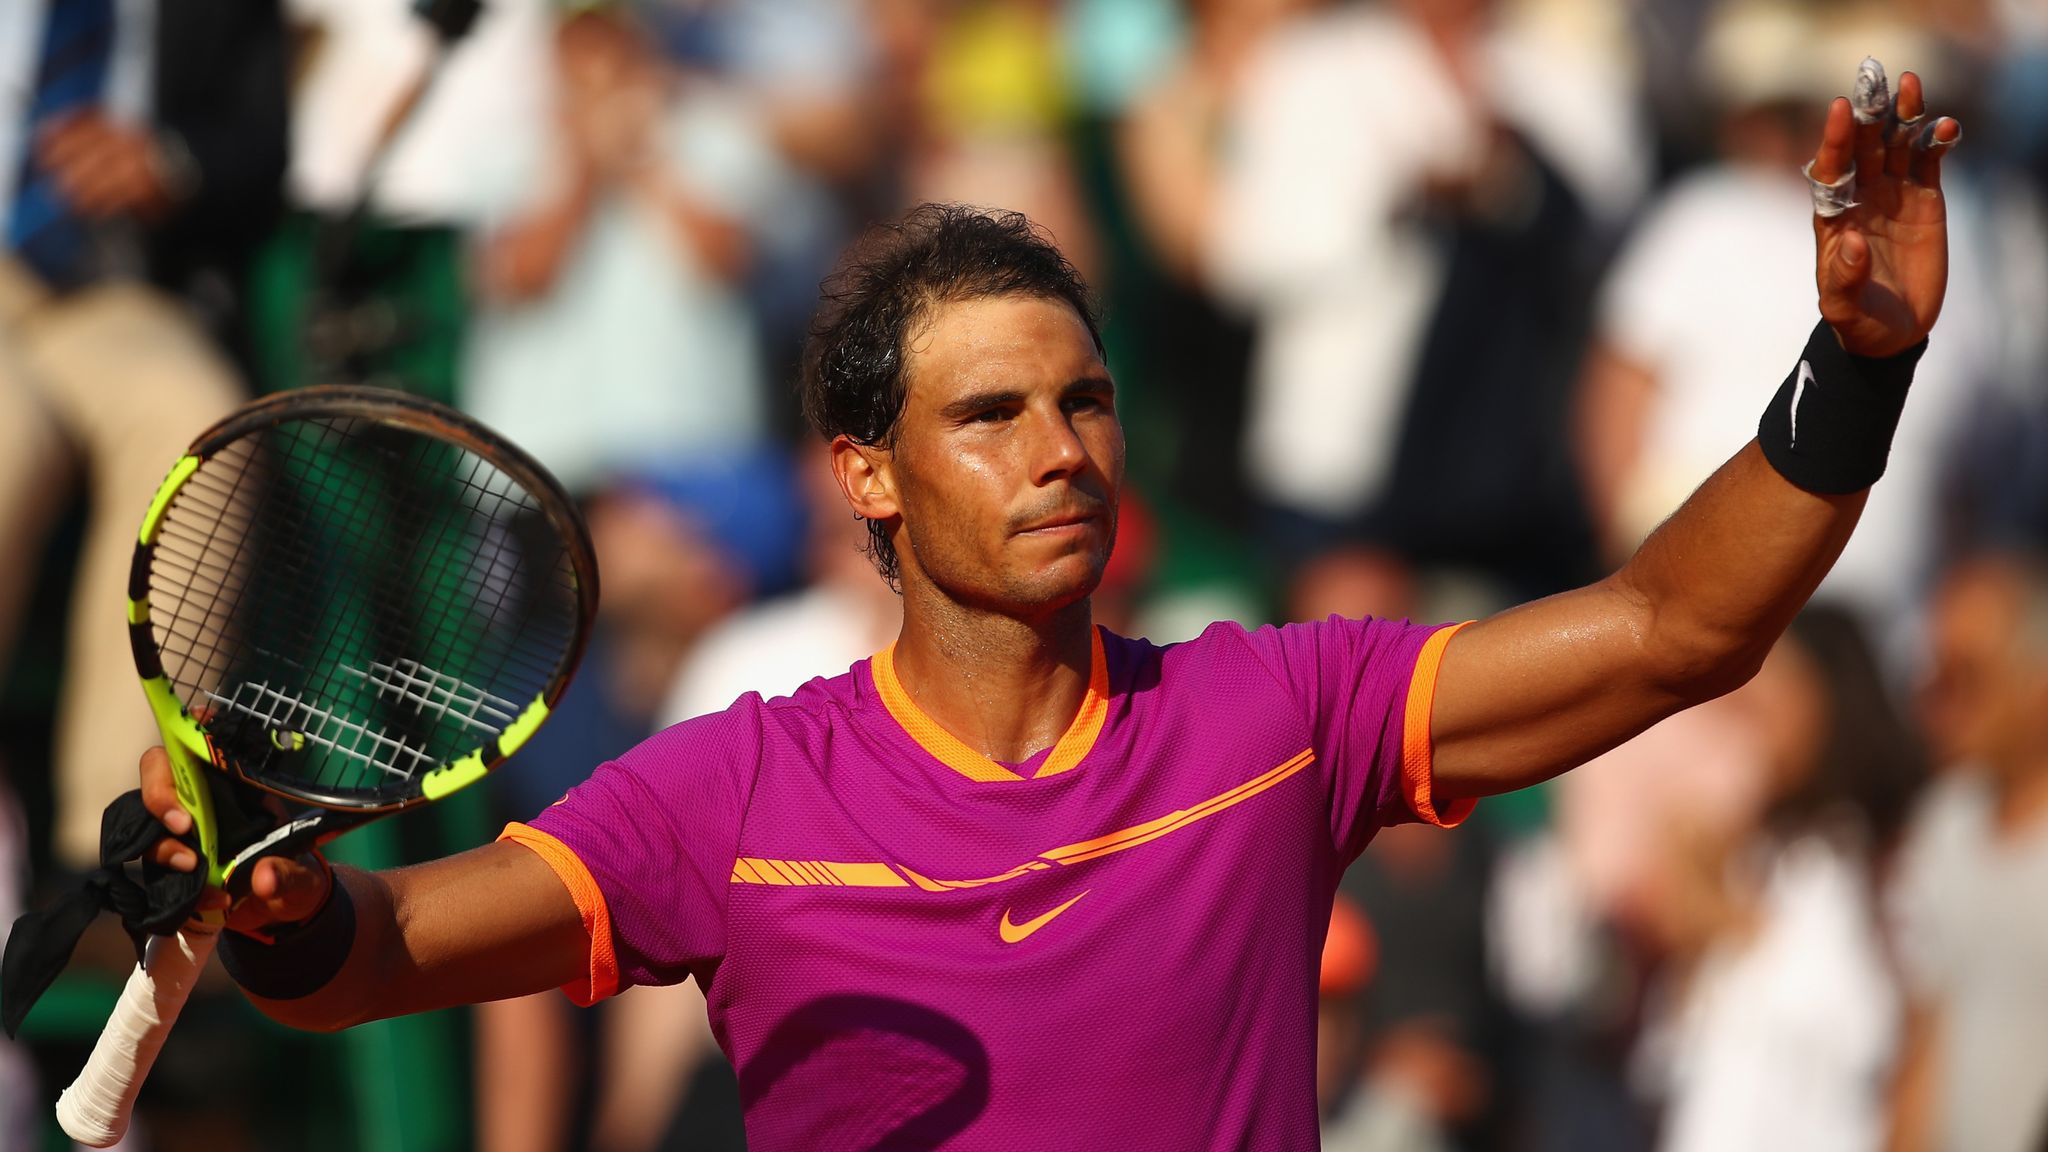 Rafael Nadal leads players to watch during clay court campaign Tennis News Sky Sports